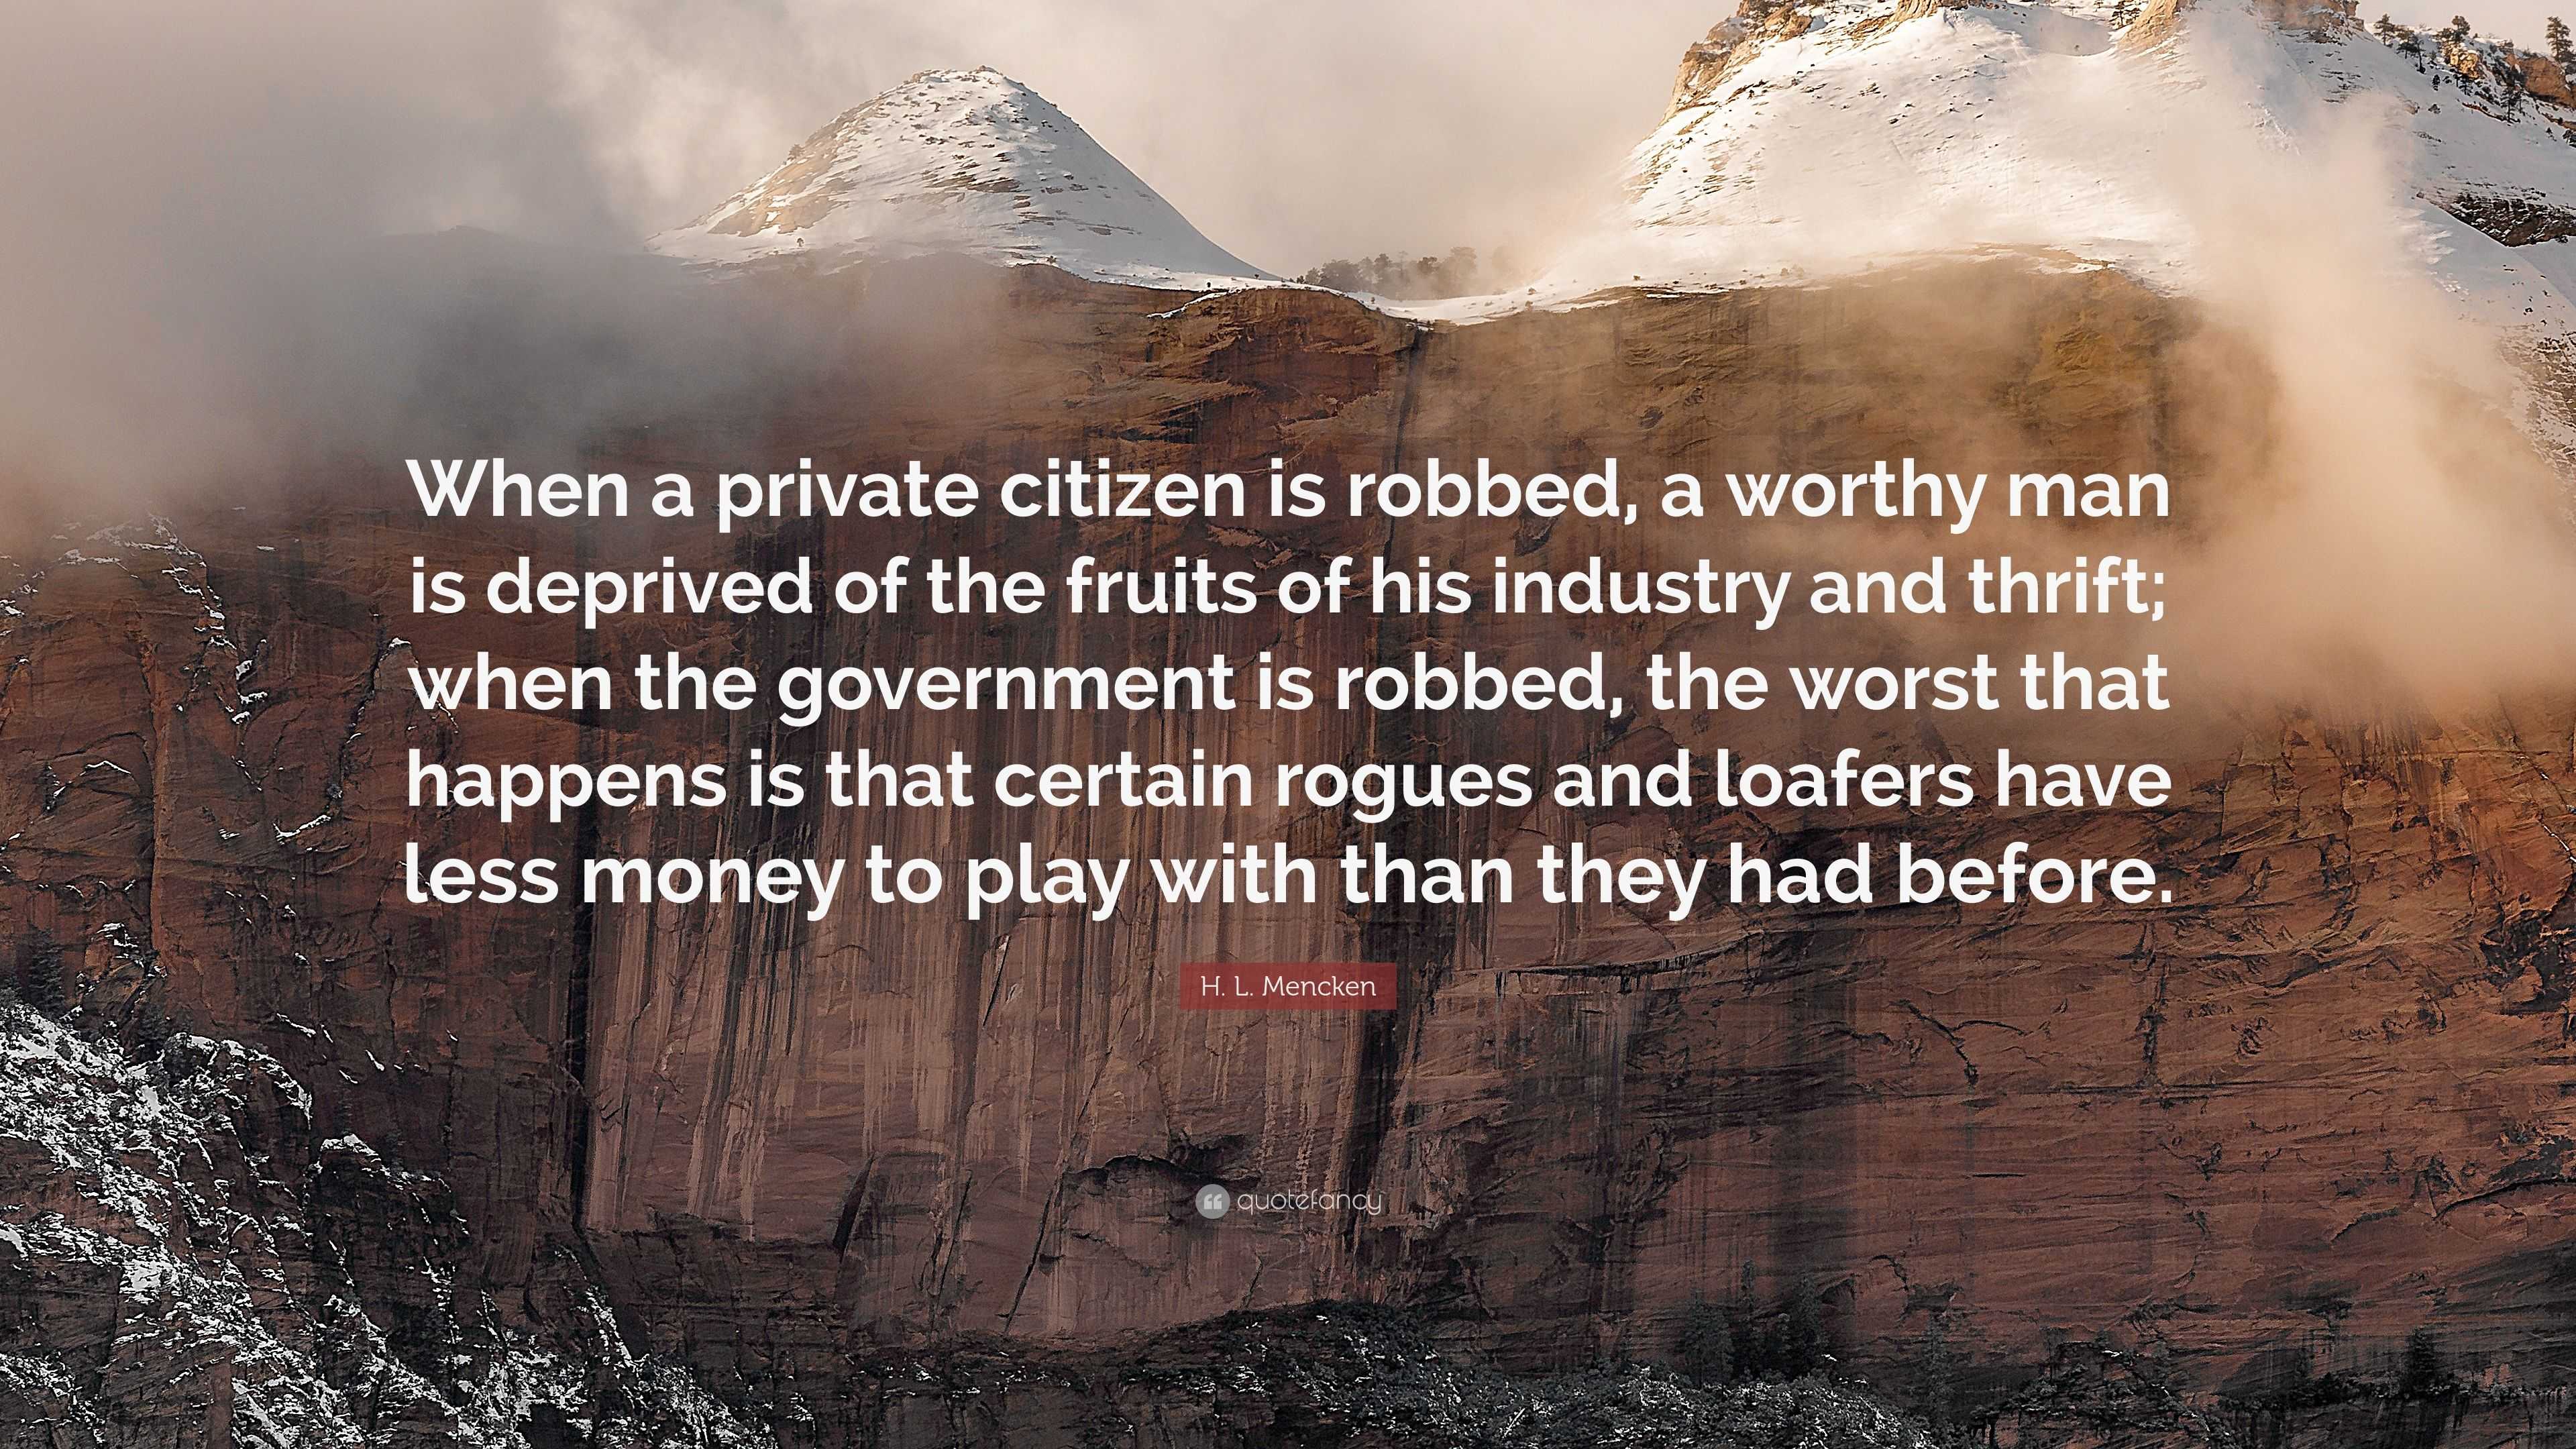 H. L. Mencken Quote: “When a private citizen is robbed, a worthy man is  deprived of the fruits of his industry and thrift; when the government...”